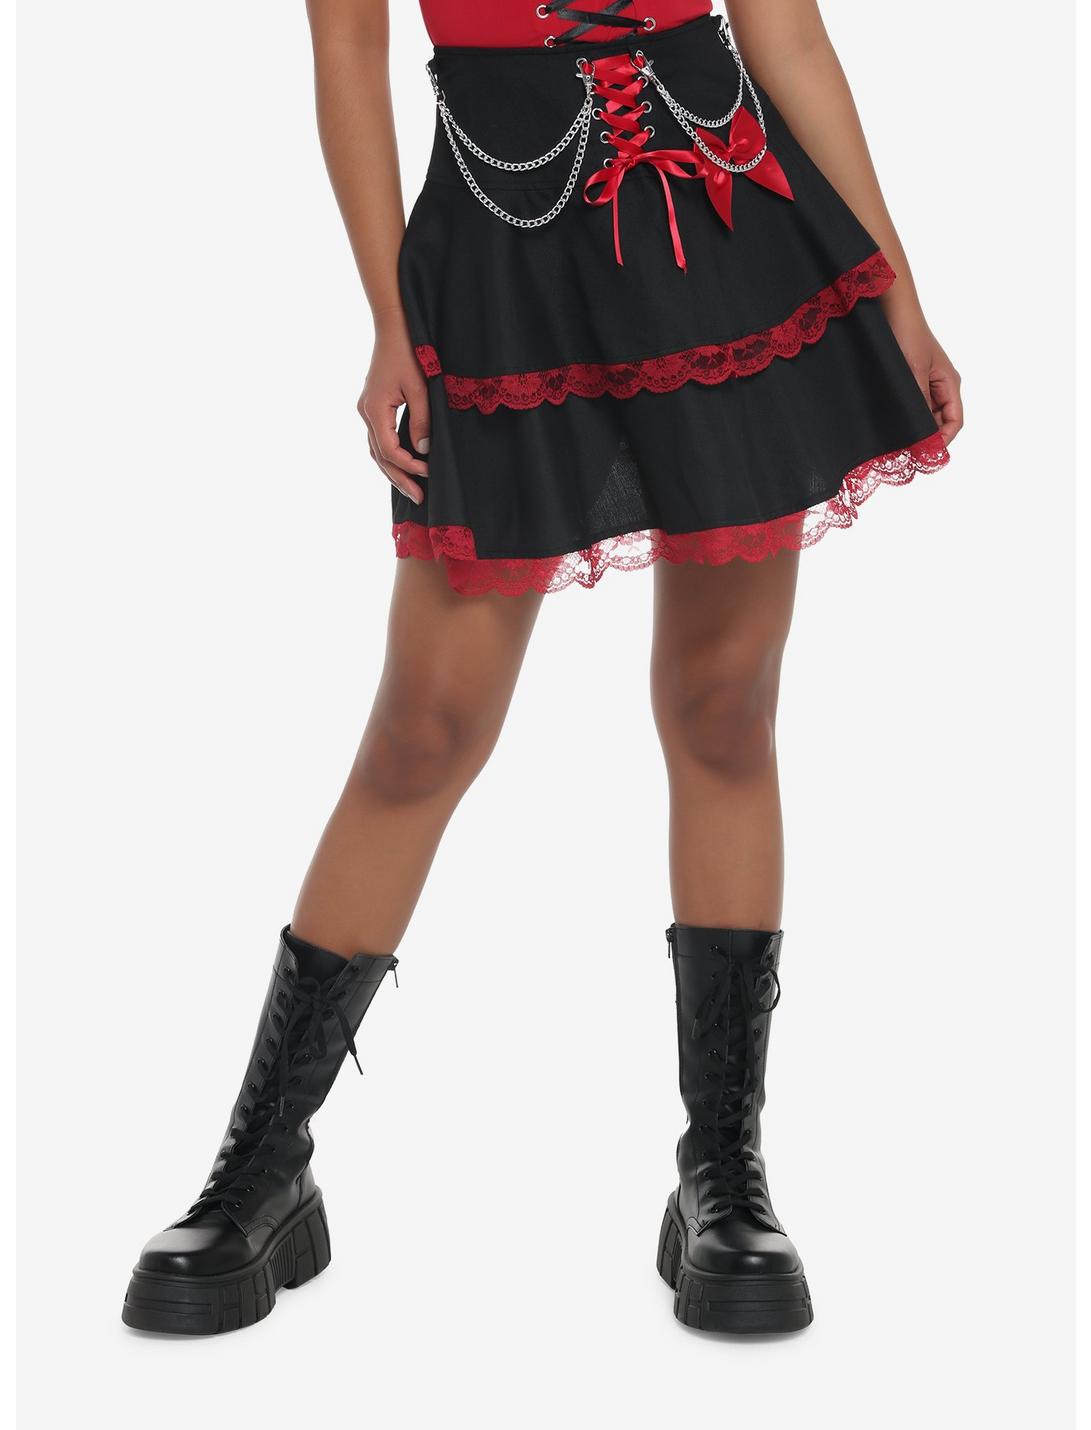 Red & Black Lace Chain Ribbon Tiered Skirt, BLACK, hi-res